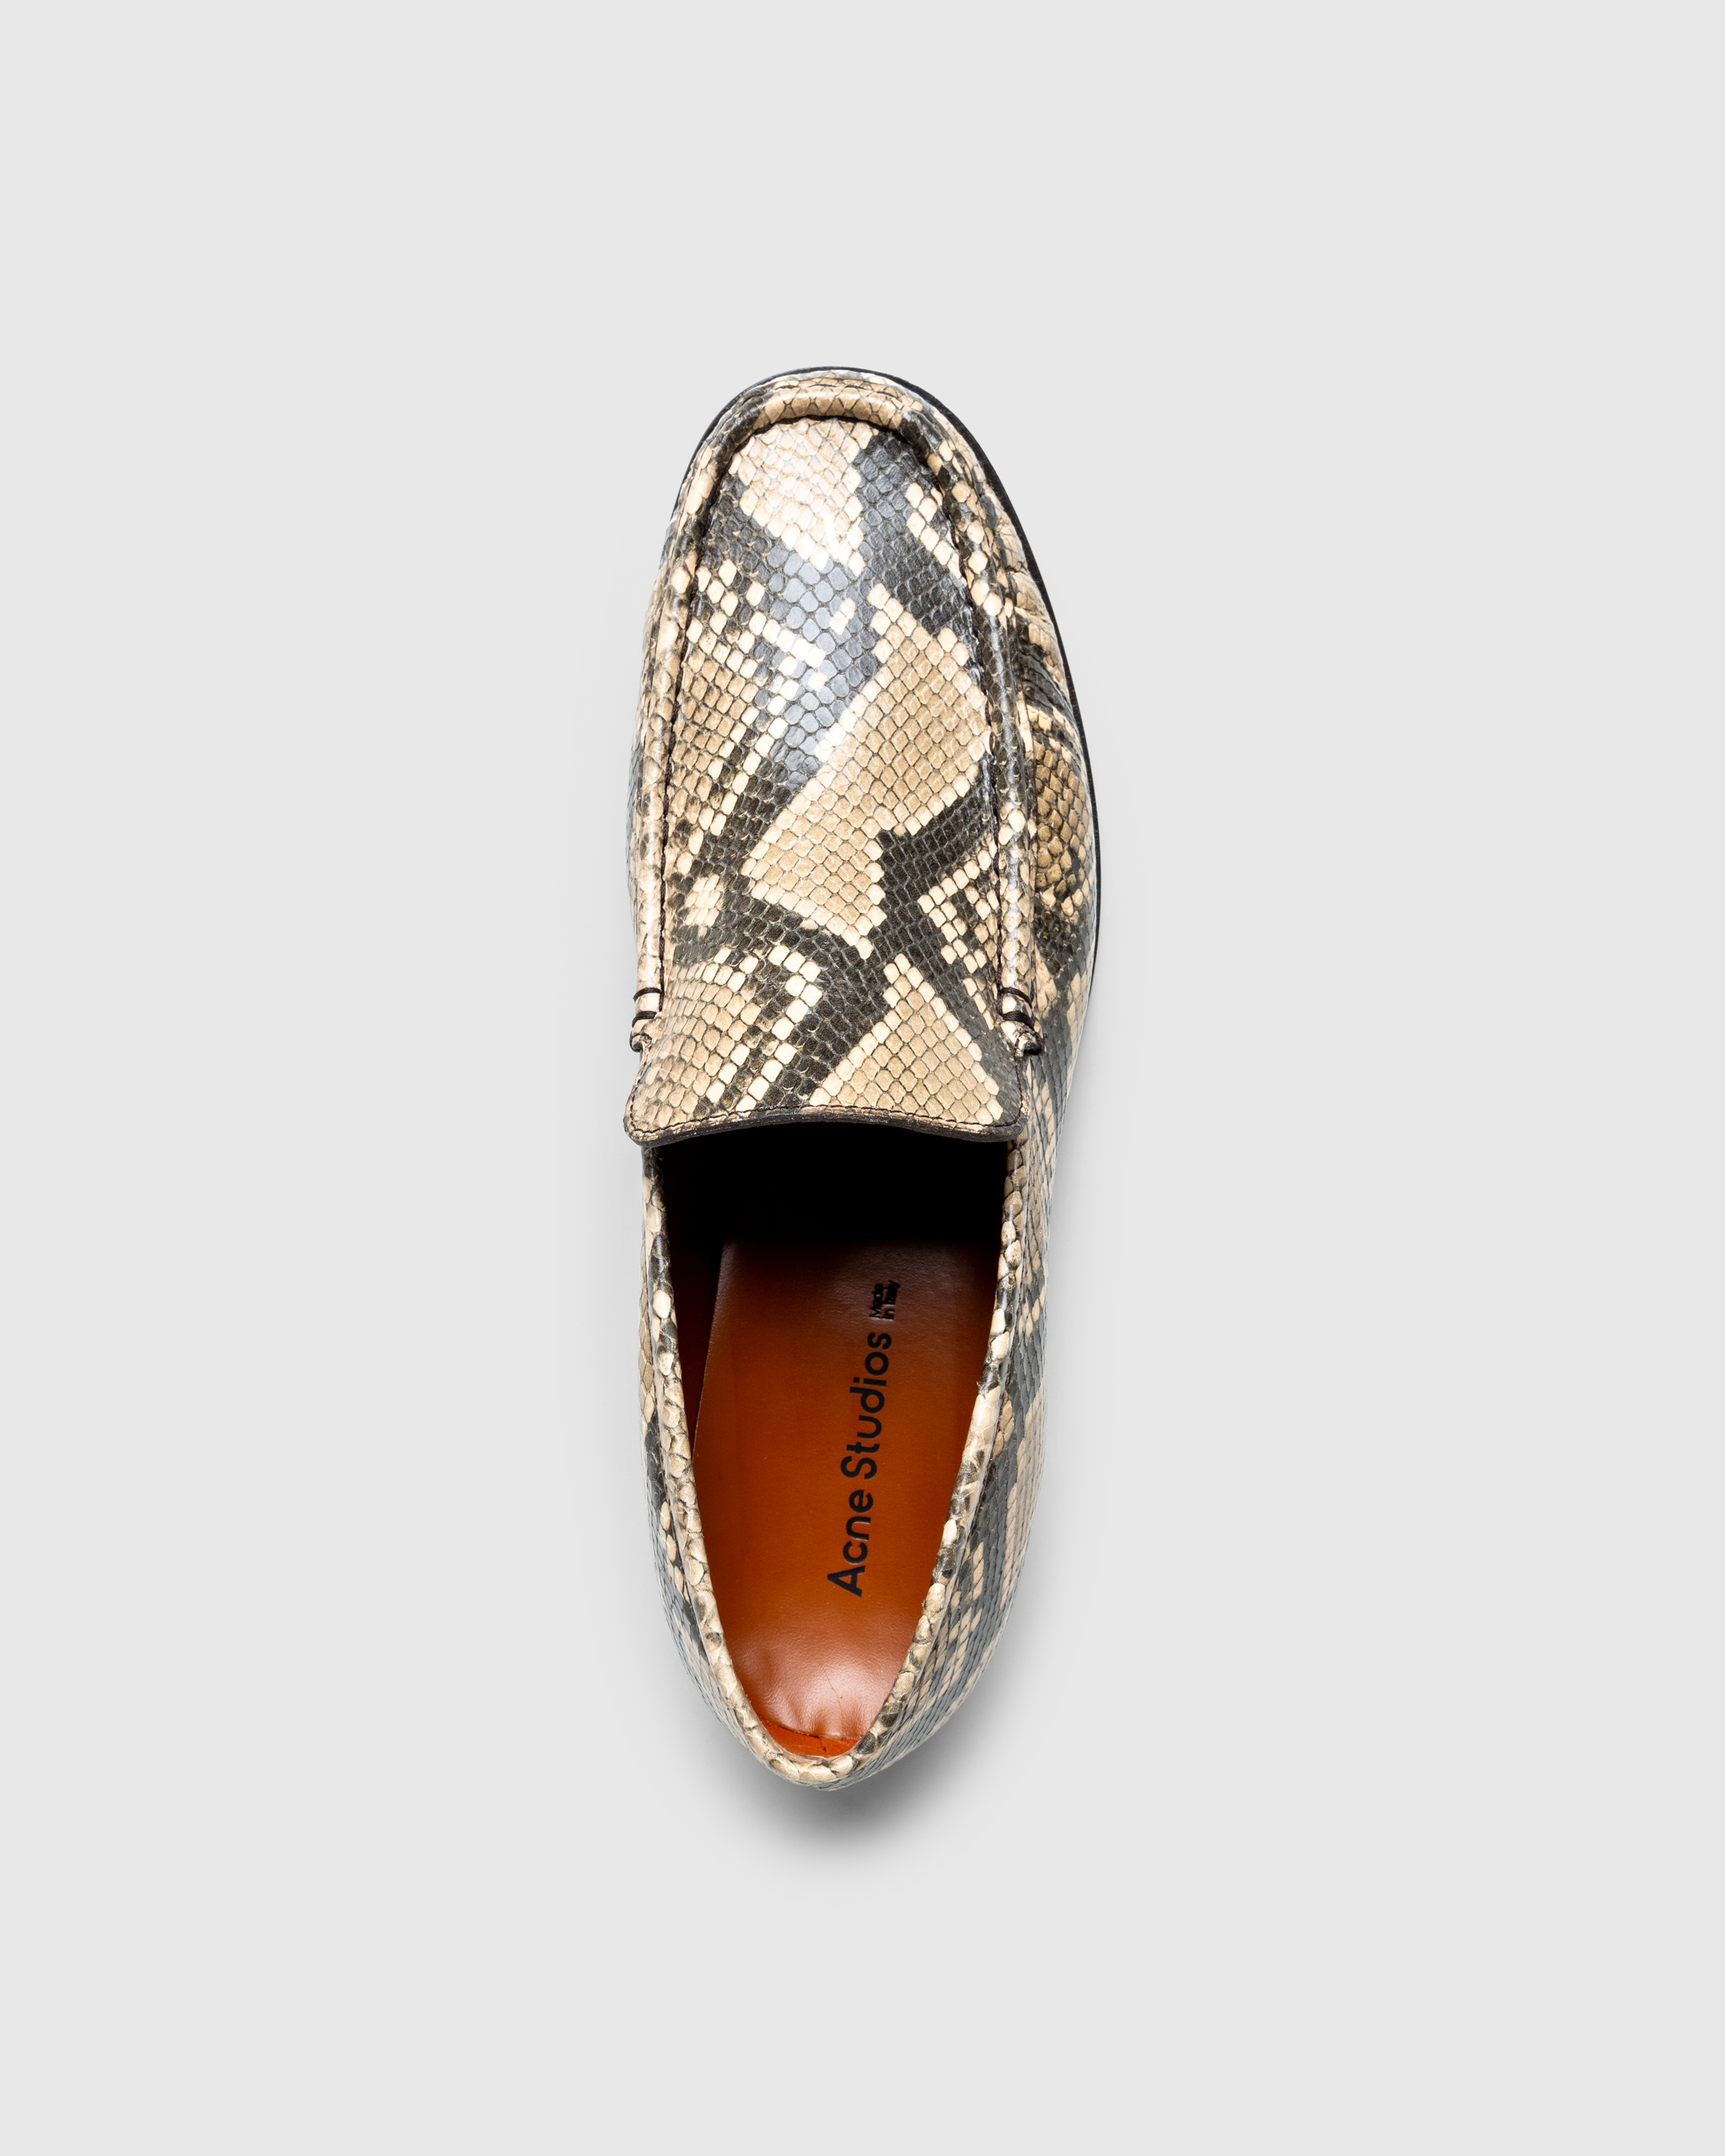 Acne Studios – Leather Loafers Beige - Sneakers - Beige - Image 5